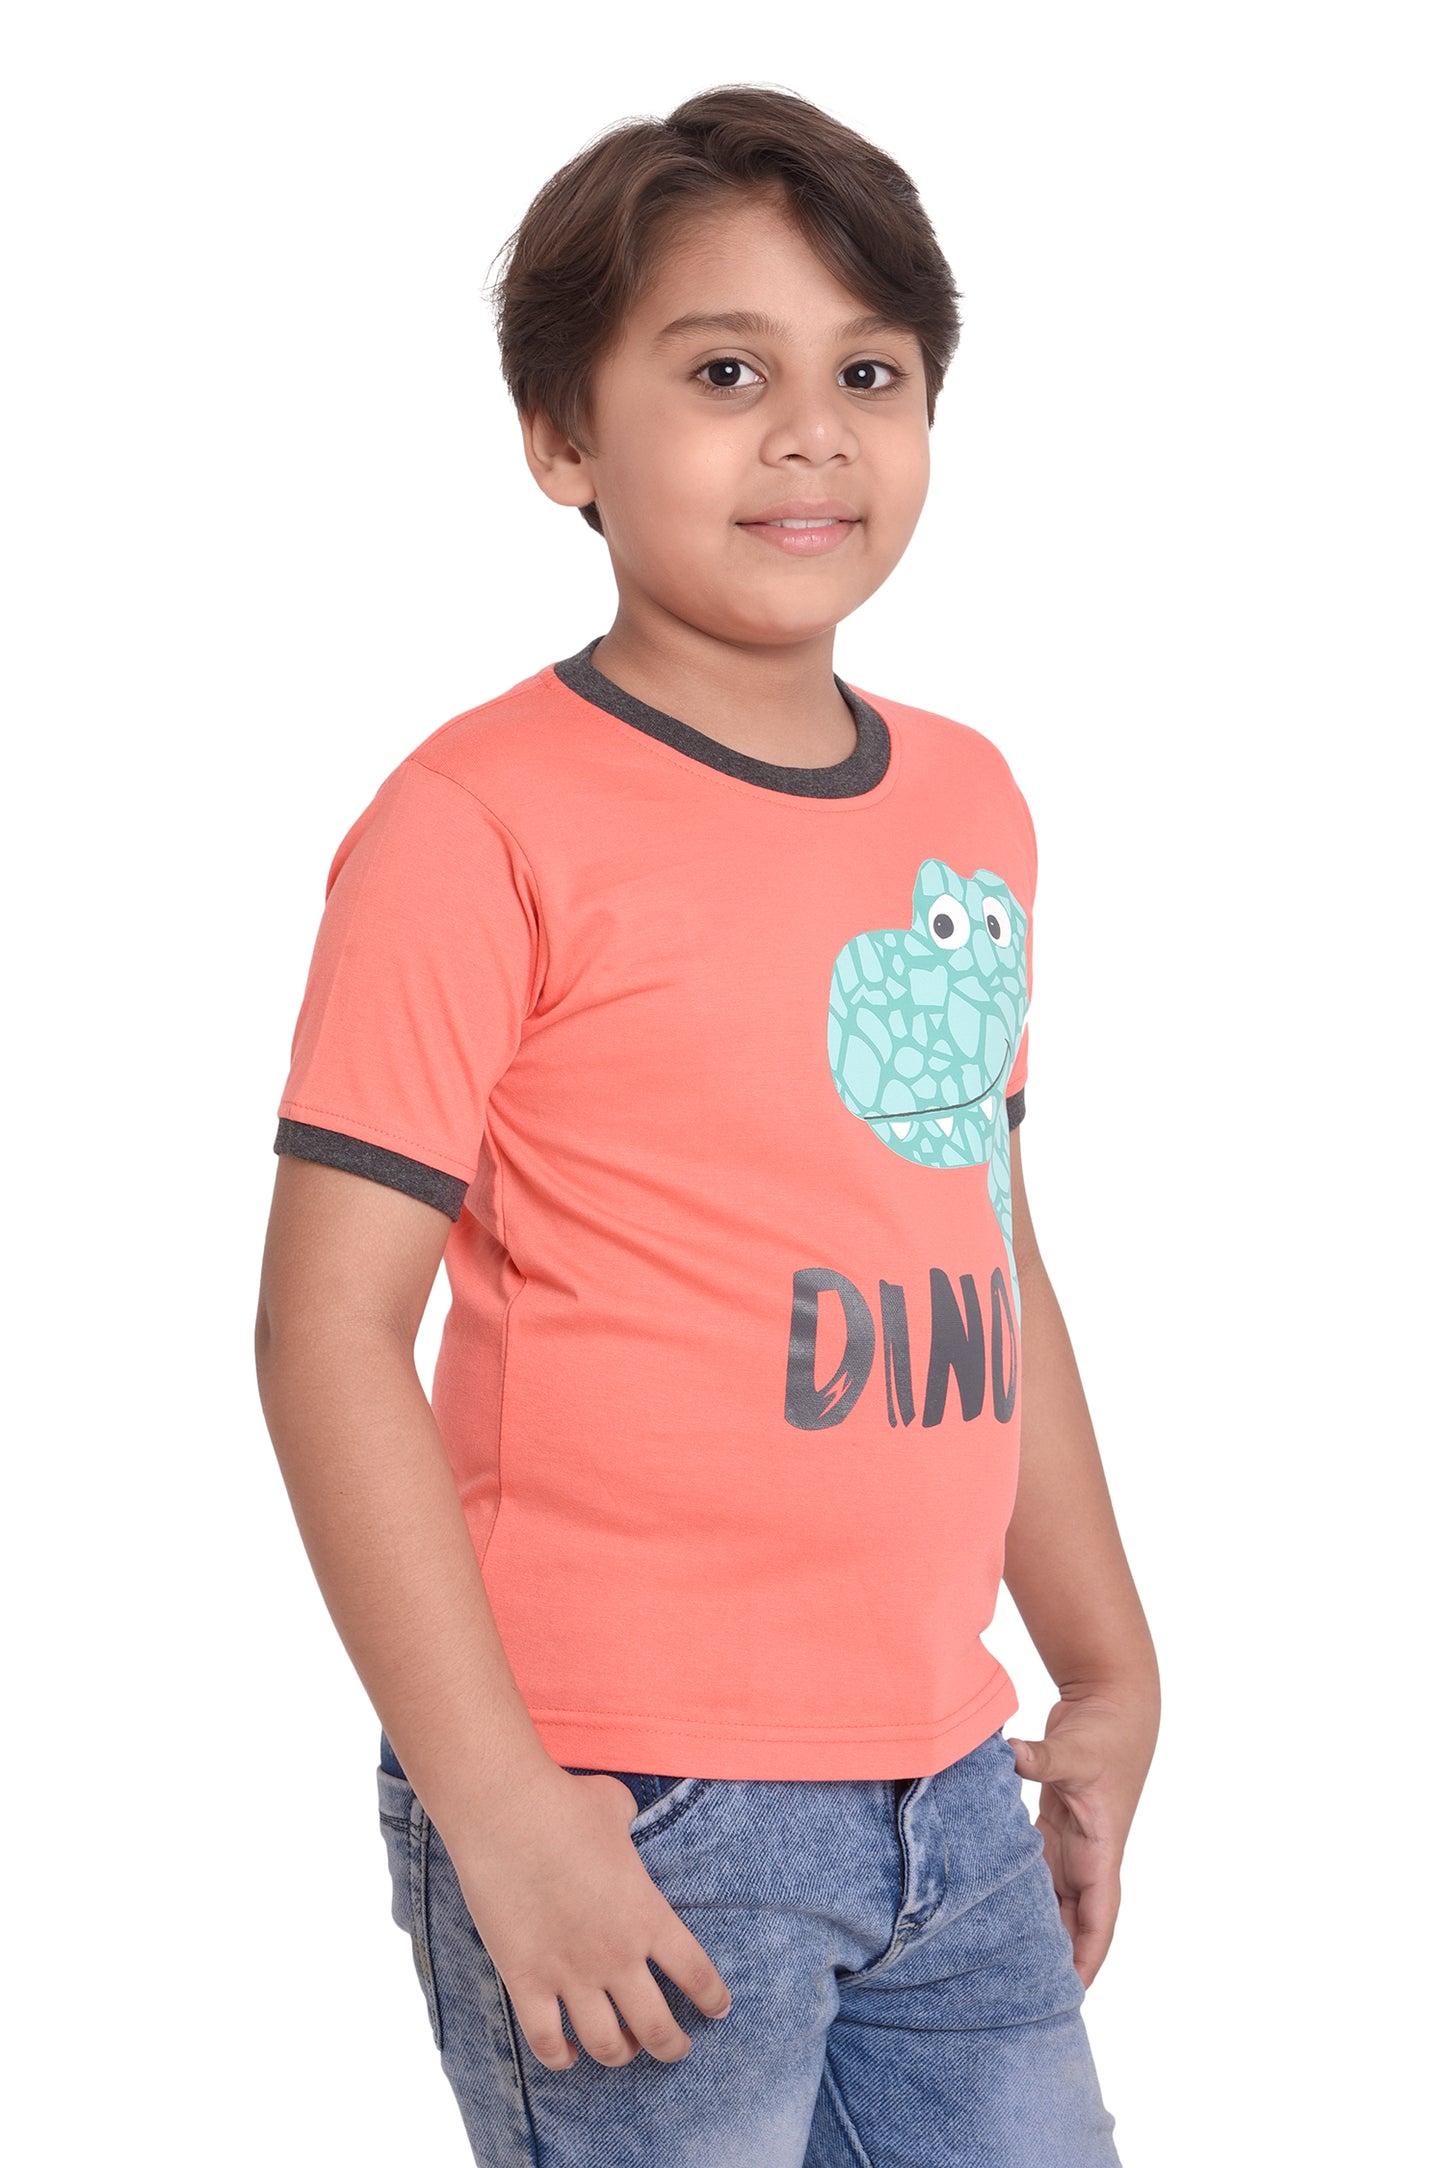 NEO GARMENTS Kids Unisex Round Neck Printed Cotton T-shirt - DINO. | SIZE FROM 1YRS TO 7YRS.